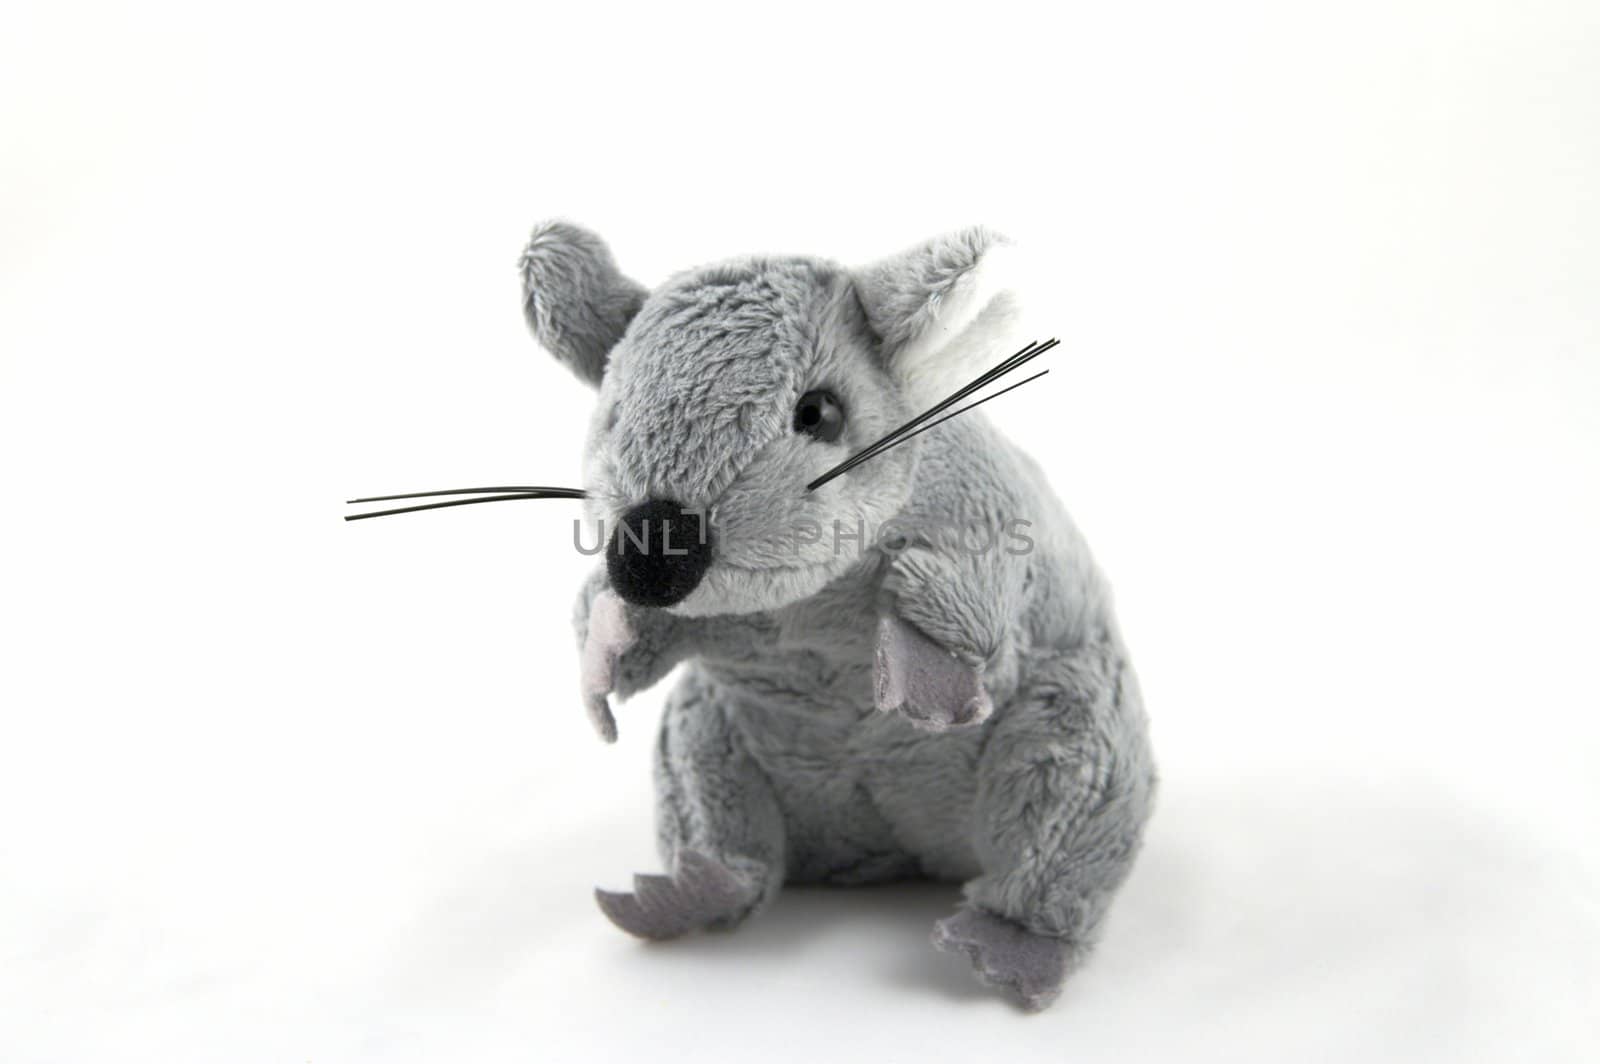 The grey toy mouse on a white background